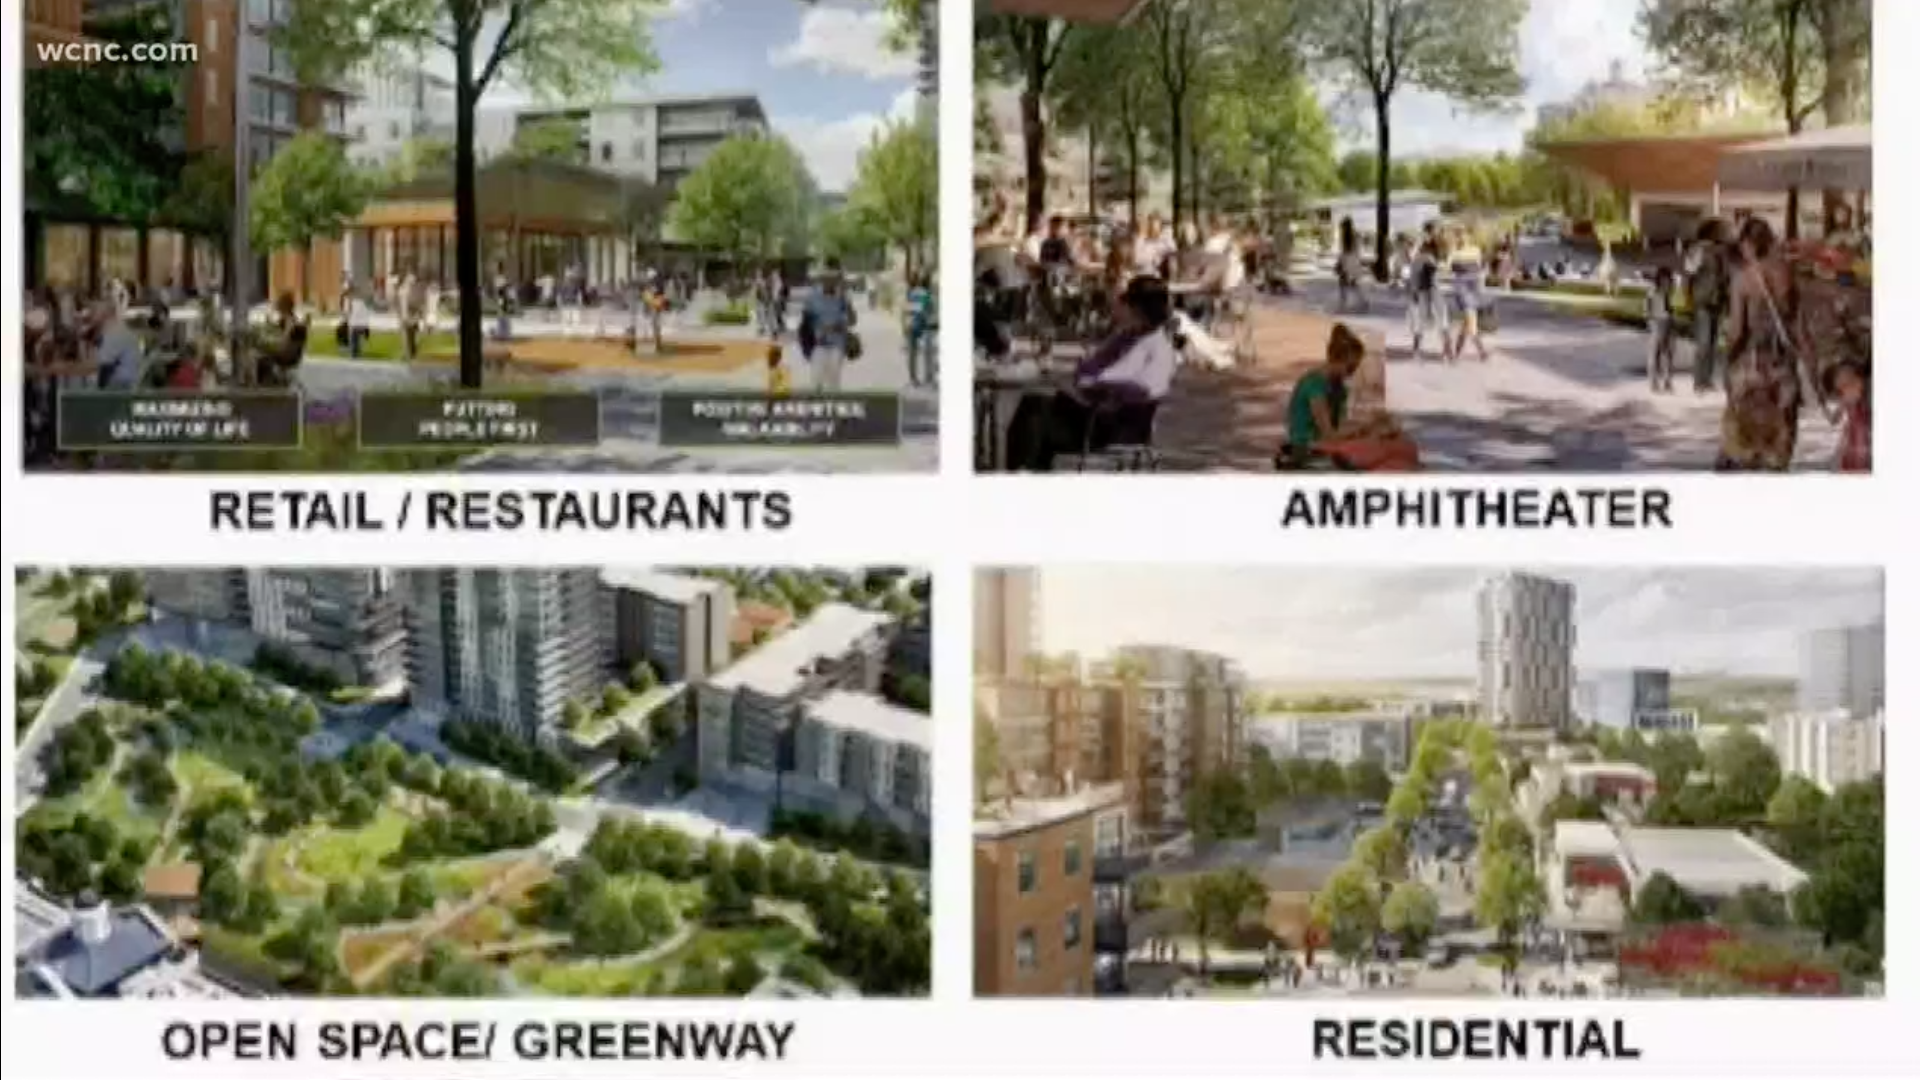 'Ballantyne Reimagined' would get rid of The Golf Club at Ballantyne, replacing it with 2,000 residential units, an amphitheater, a greenway, and more.